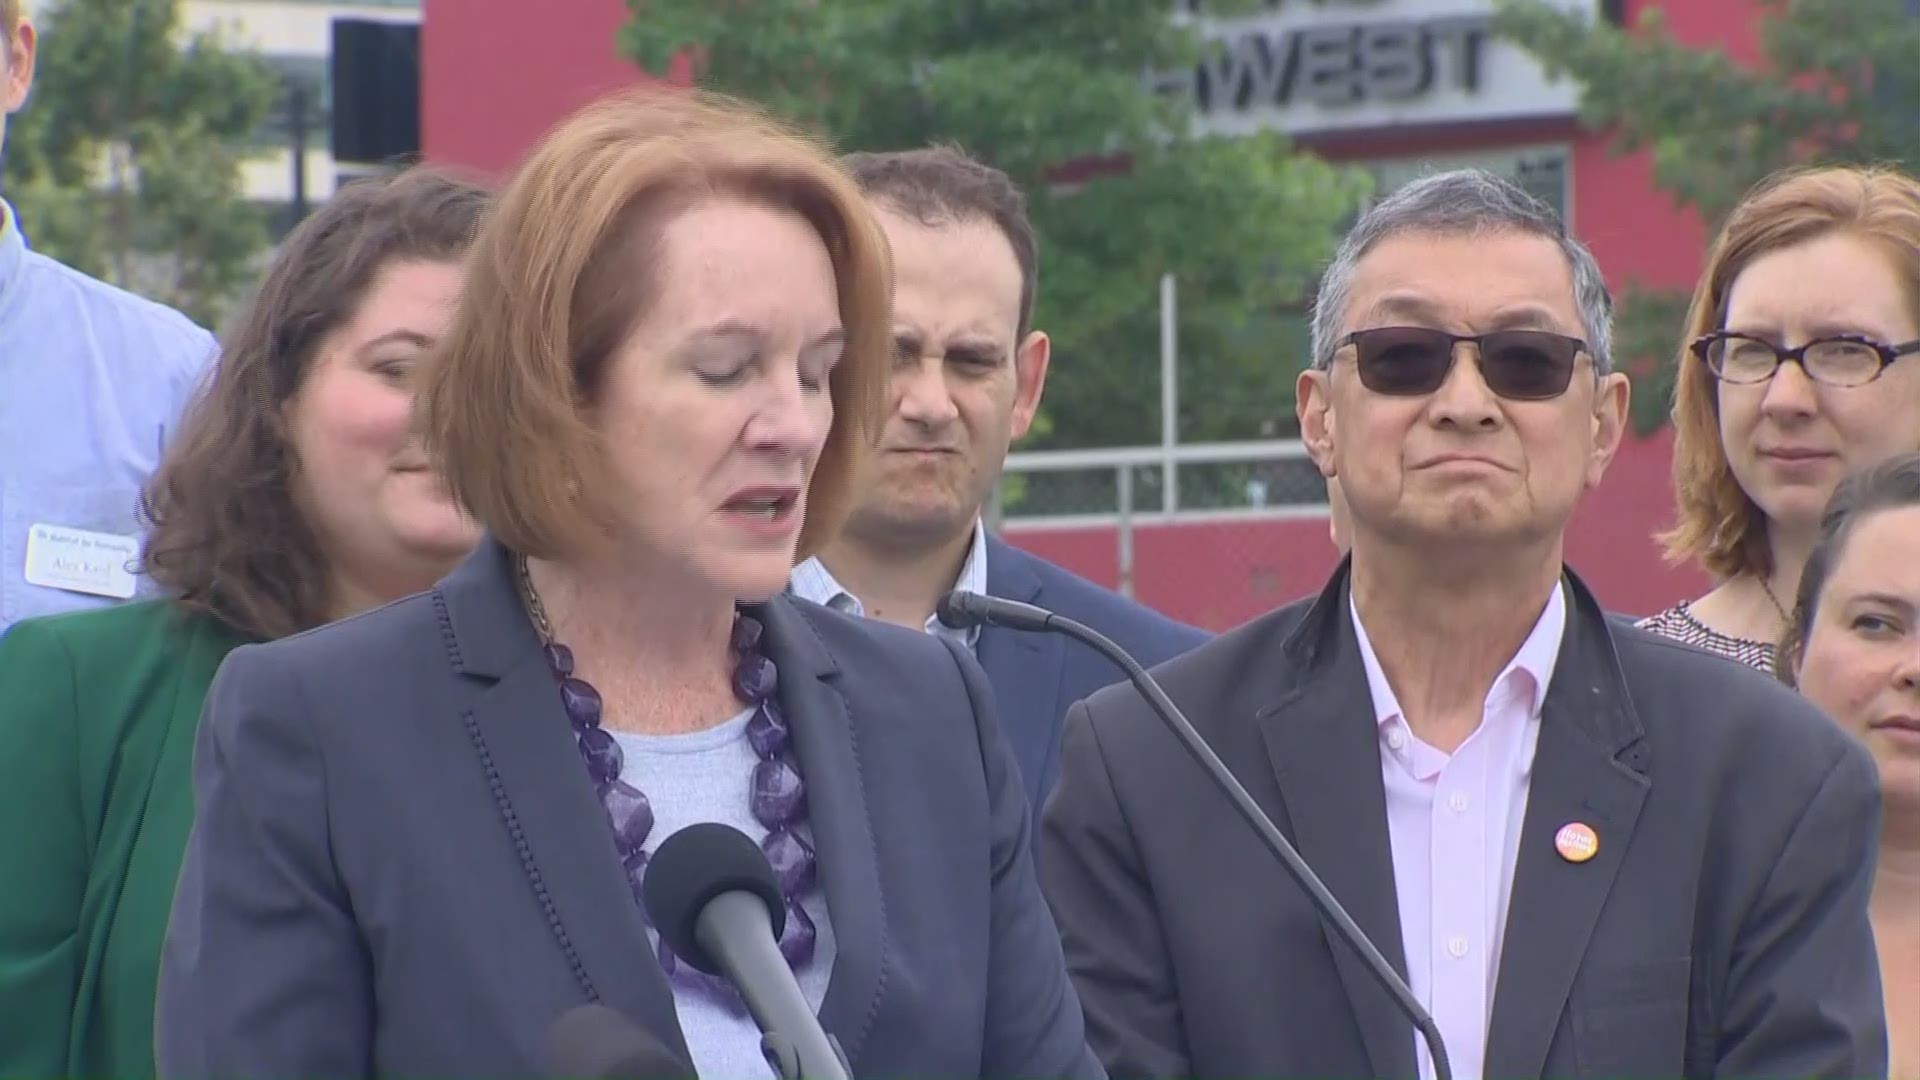 Mayor Durkan says the land deal will bring in about $300 million in public benefits